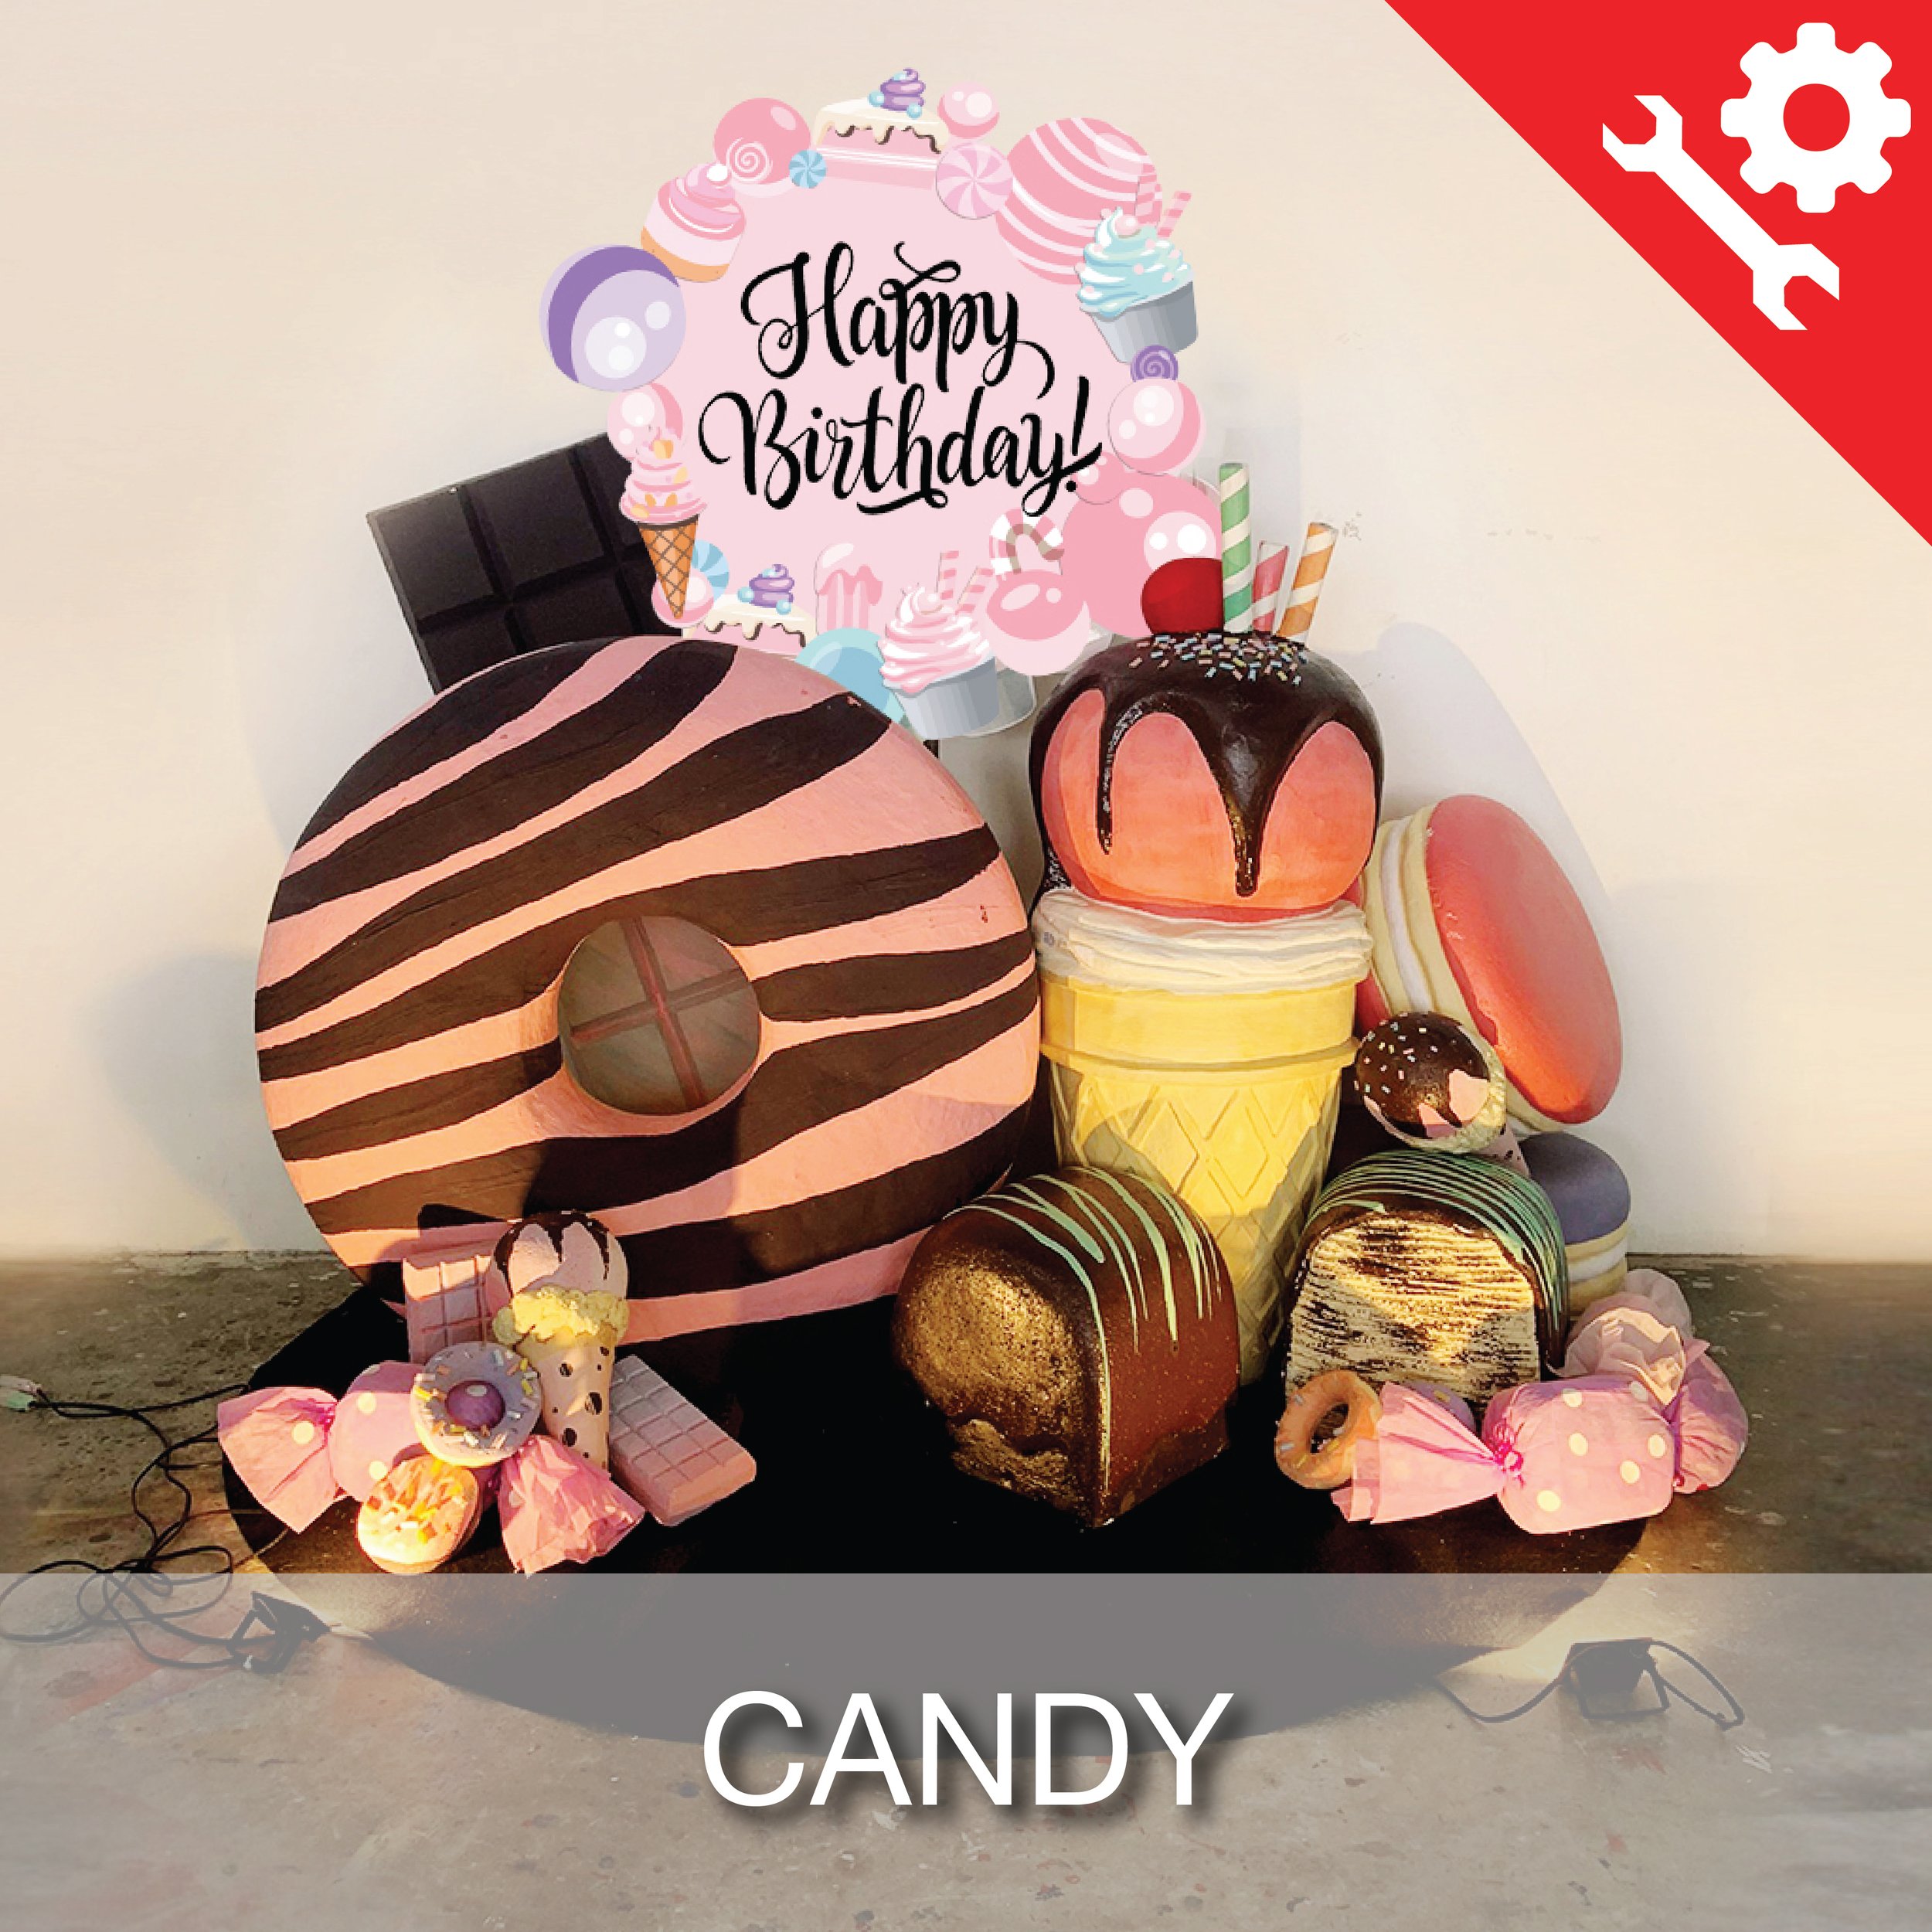 Cover_Manual-Candy-01.jpg